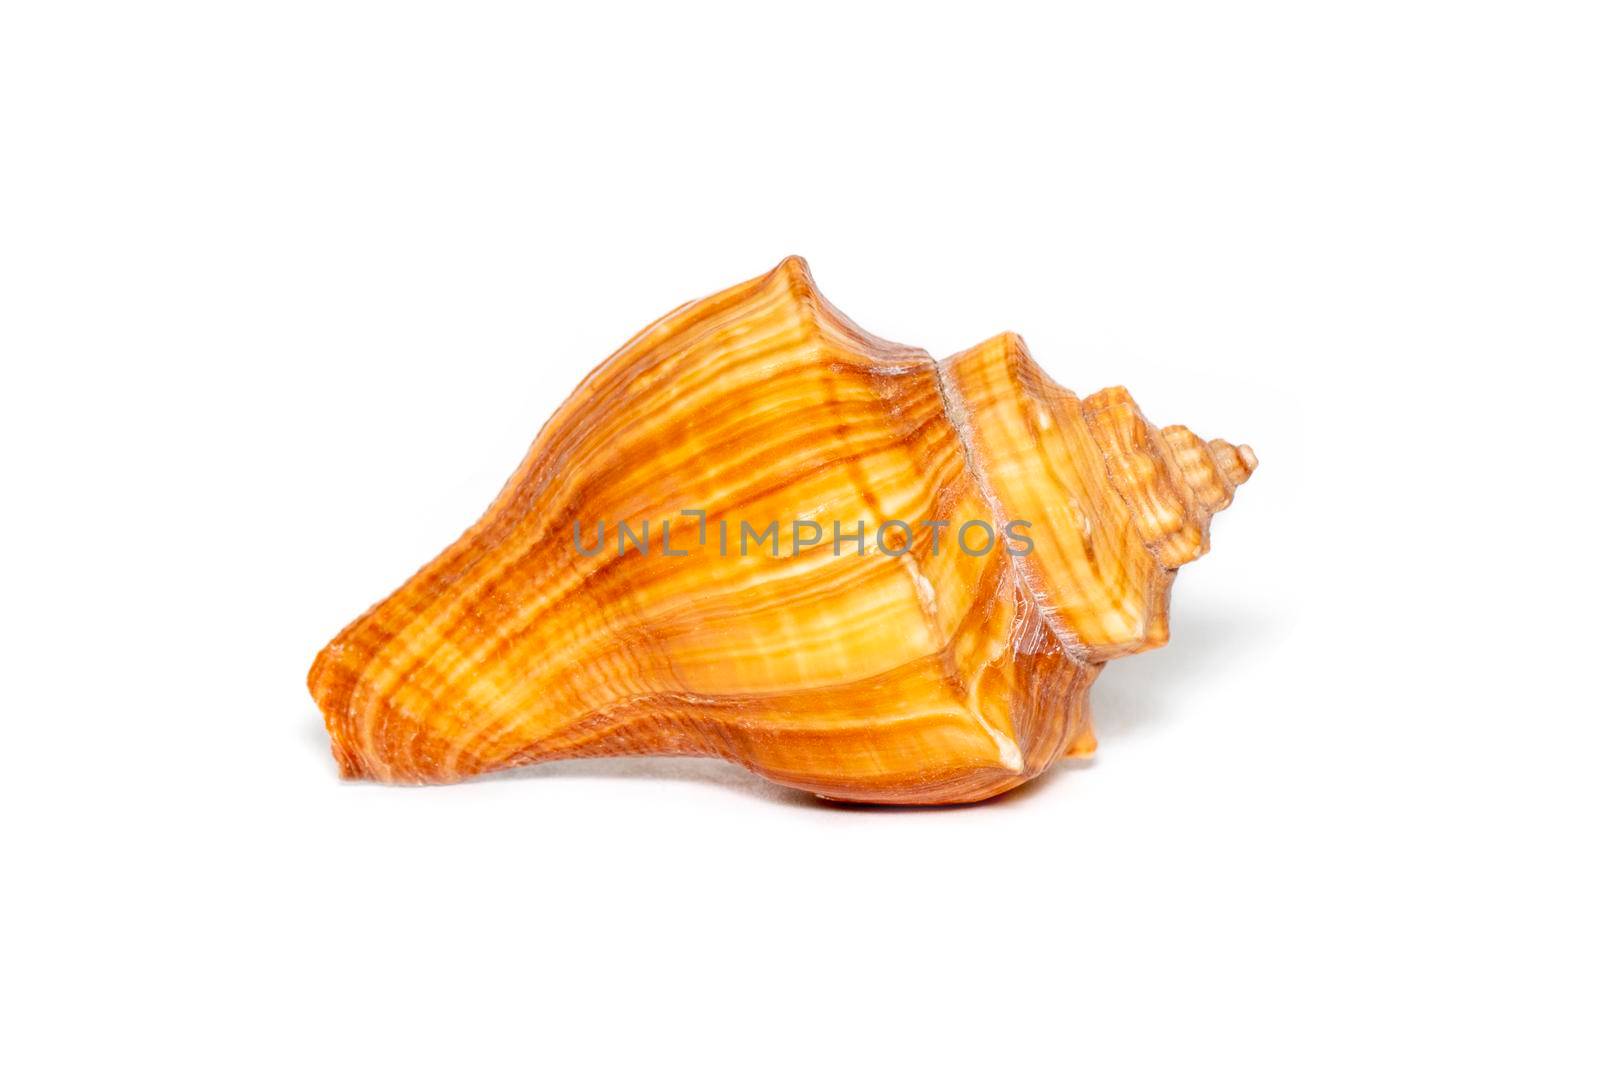 Image of brown conch sea shell on a white background. Undersea Animals. Sea shells. by yod67